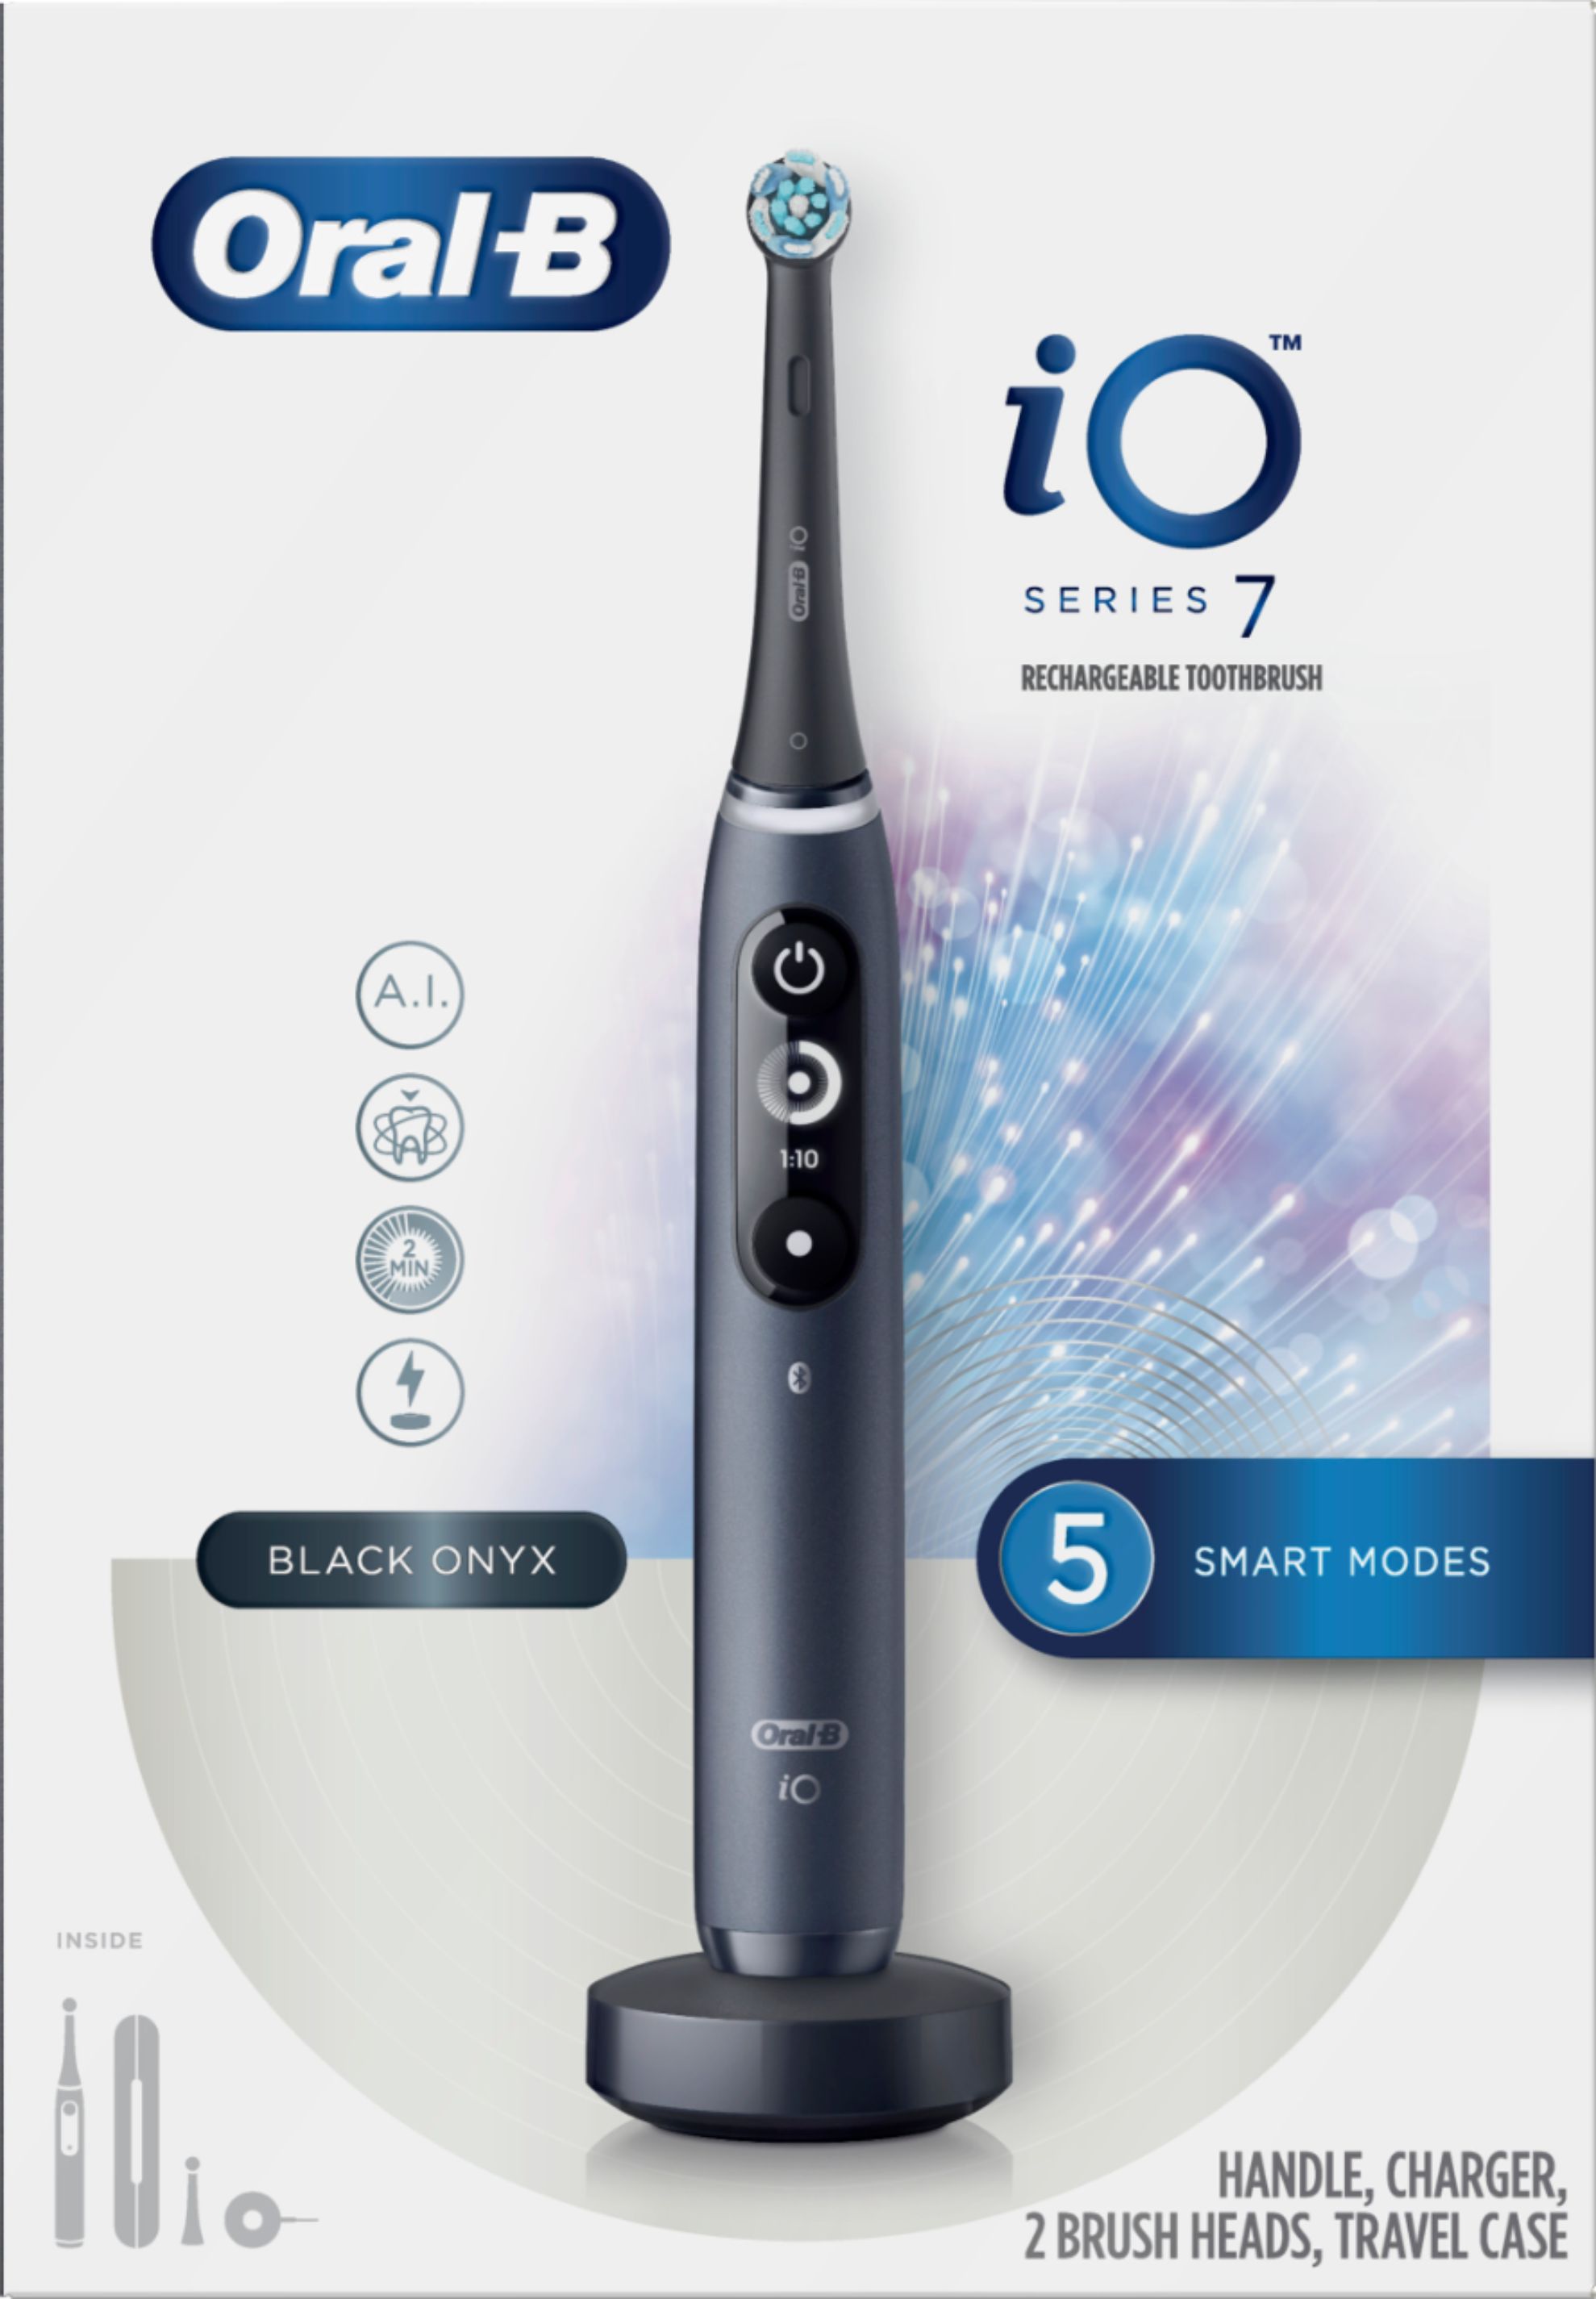 Angle View: Oral-B - iO Series 7 Connected Rechargeable Electric Toothbrush - Onyx Black